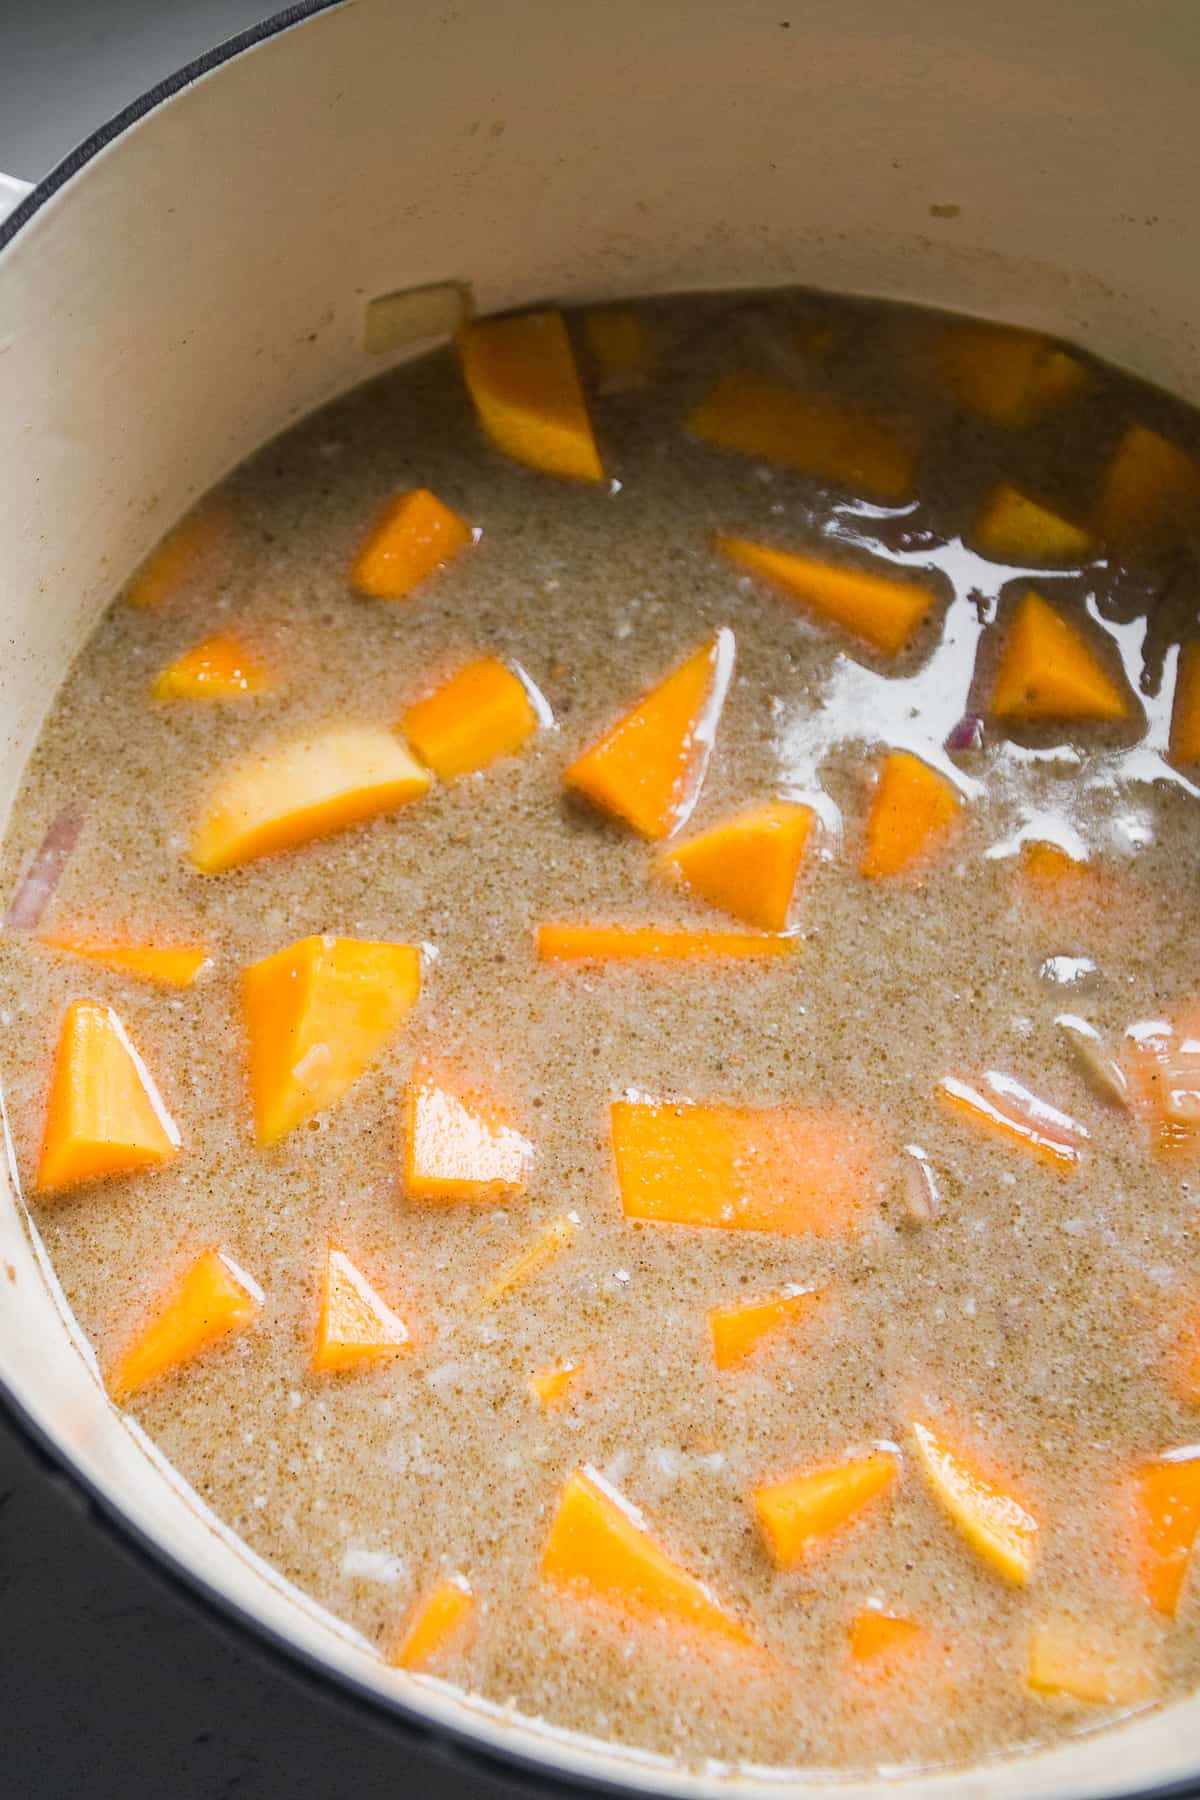 Butternut squash cubes in a pot with broth and coconut milk about to be cooked.